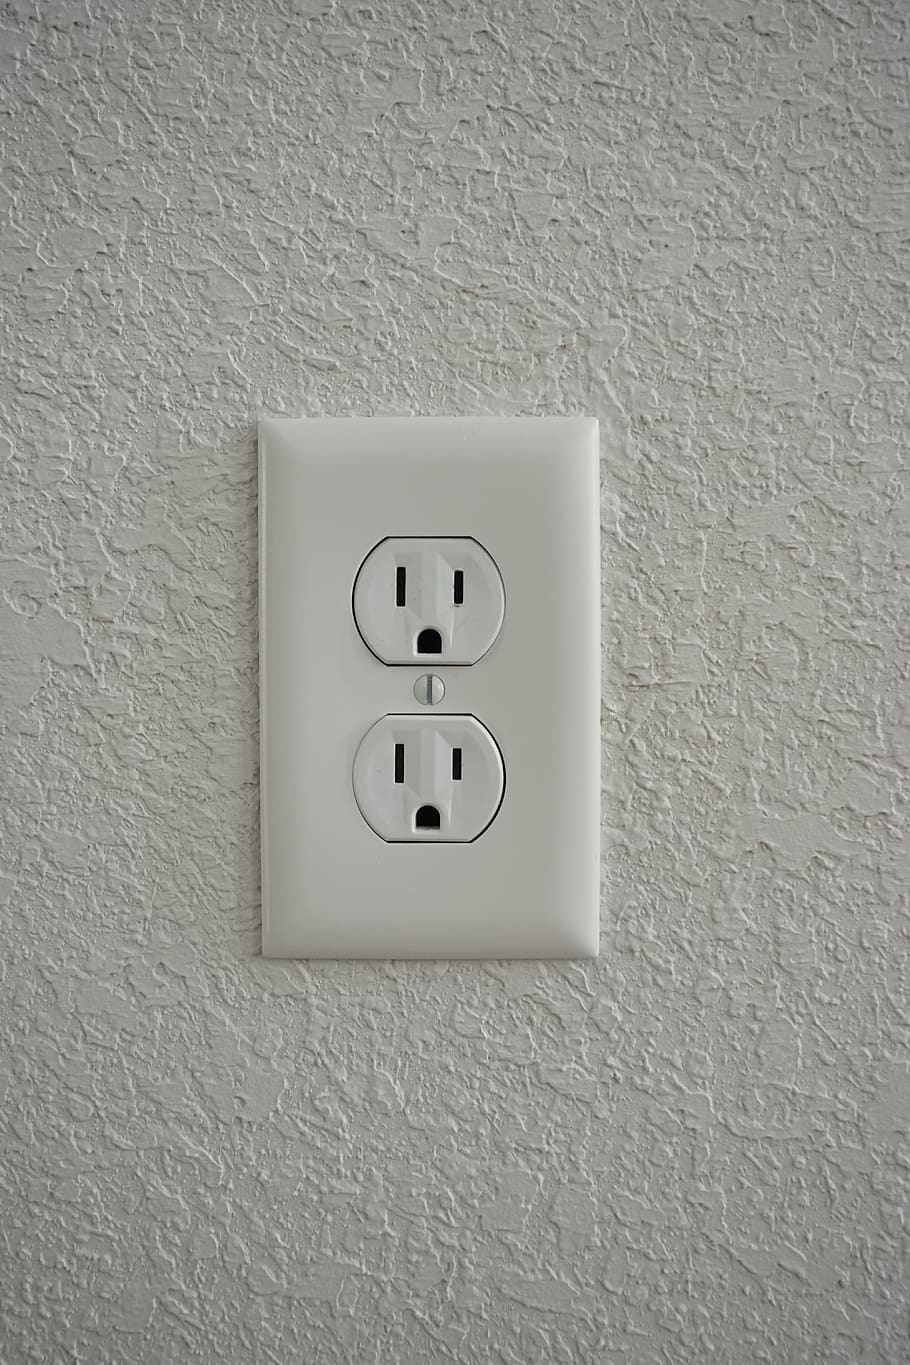 concent, power socket, plug, electric, wall, connection, code, icon, surprised face, surprised